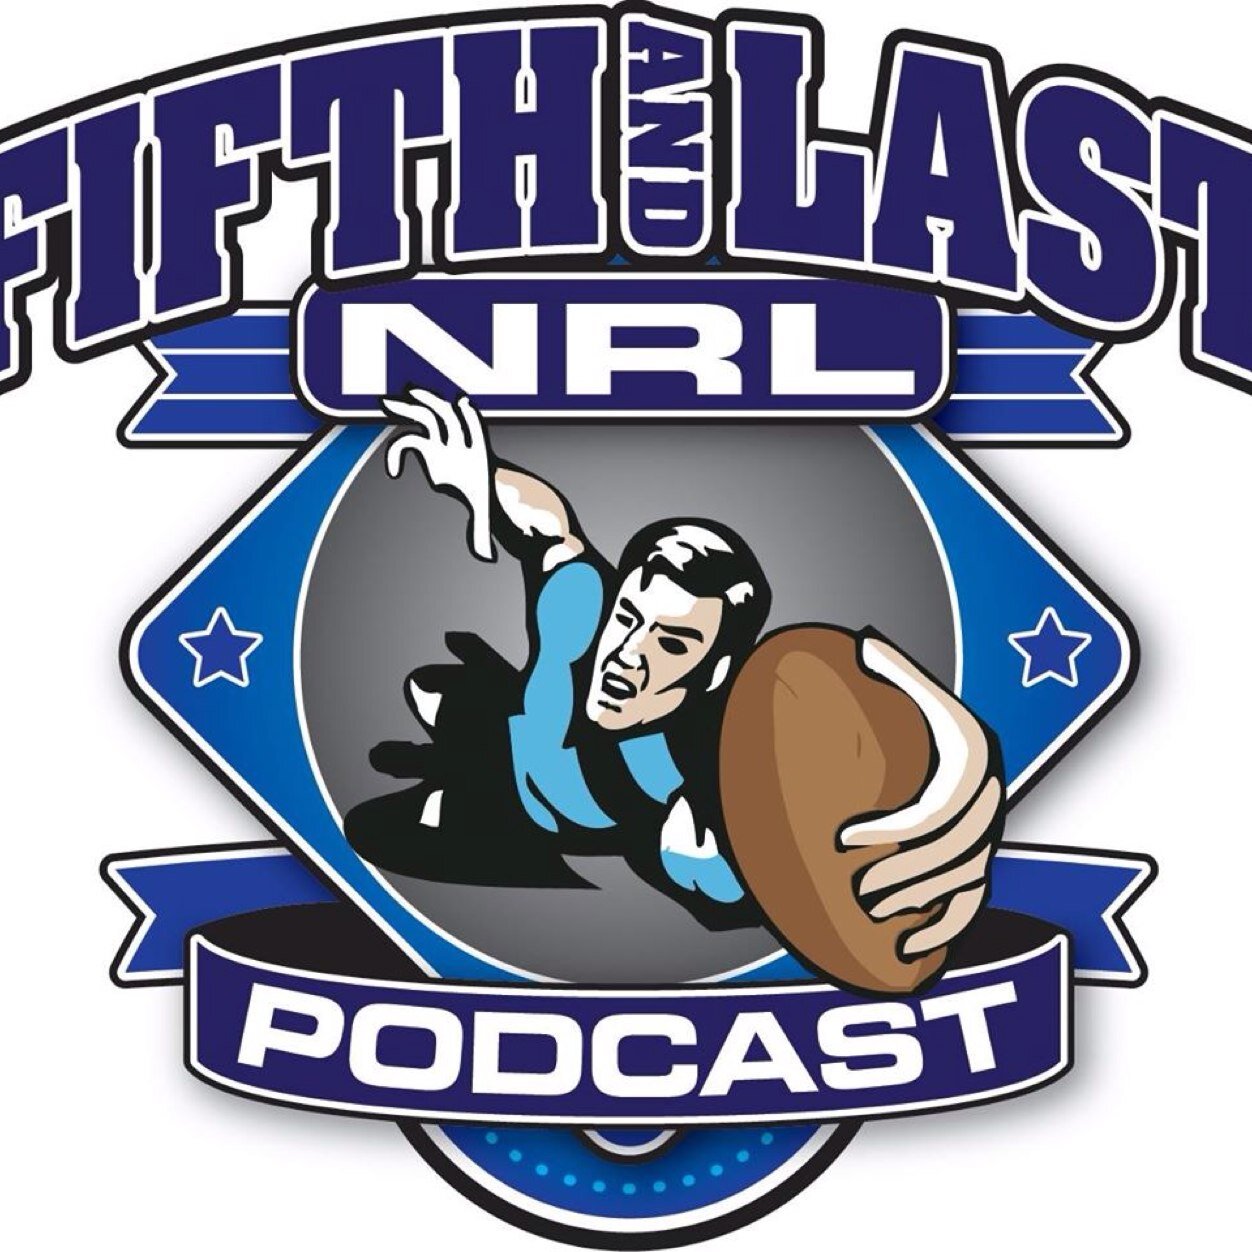 Fifth and Last NRL Podcast